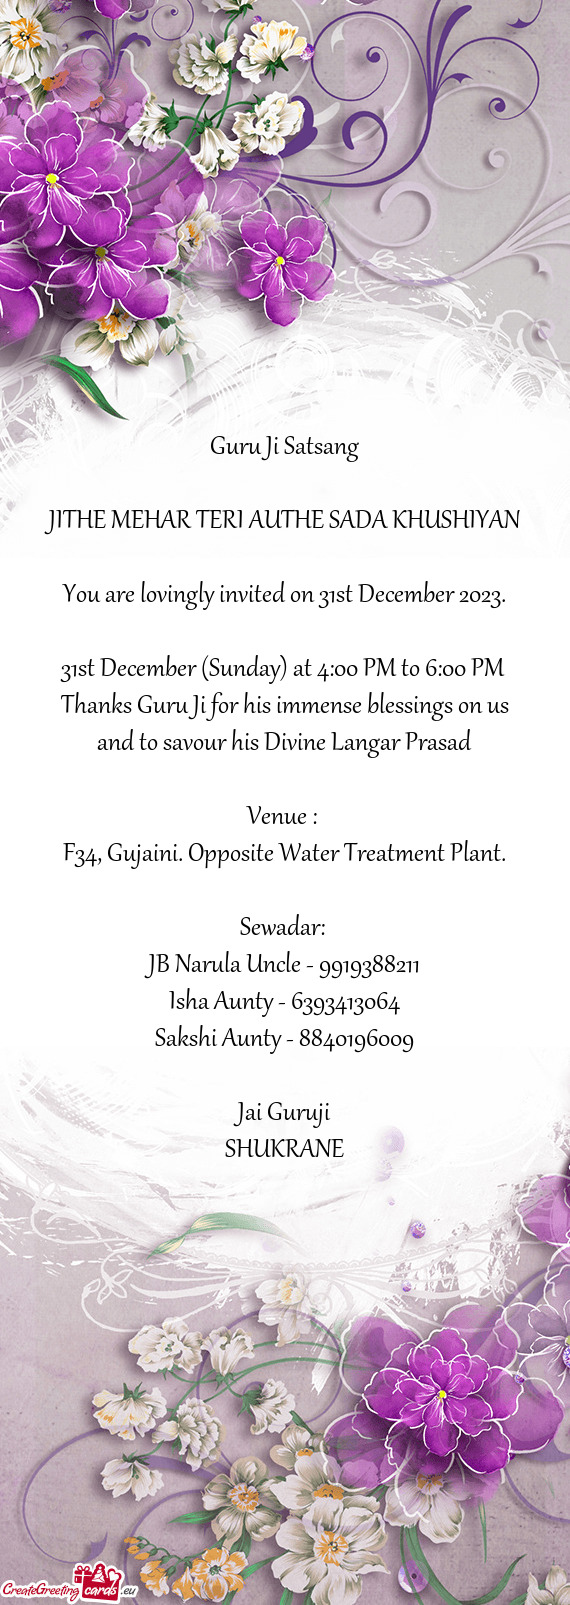 You are lovingly invited on 31st December 2023